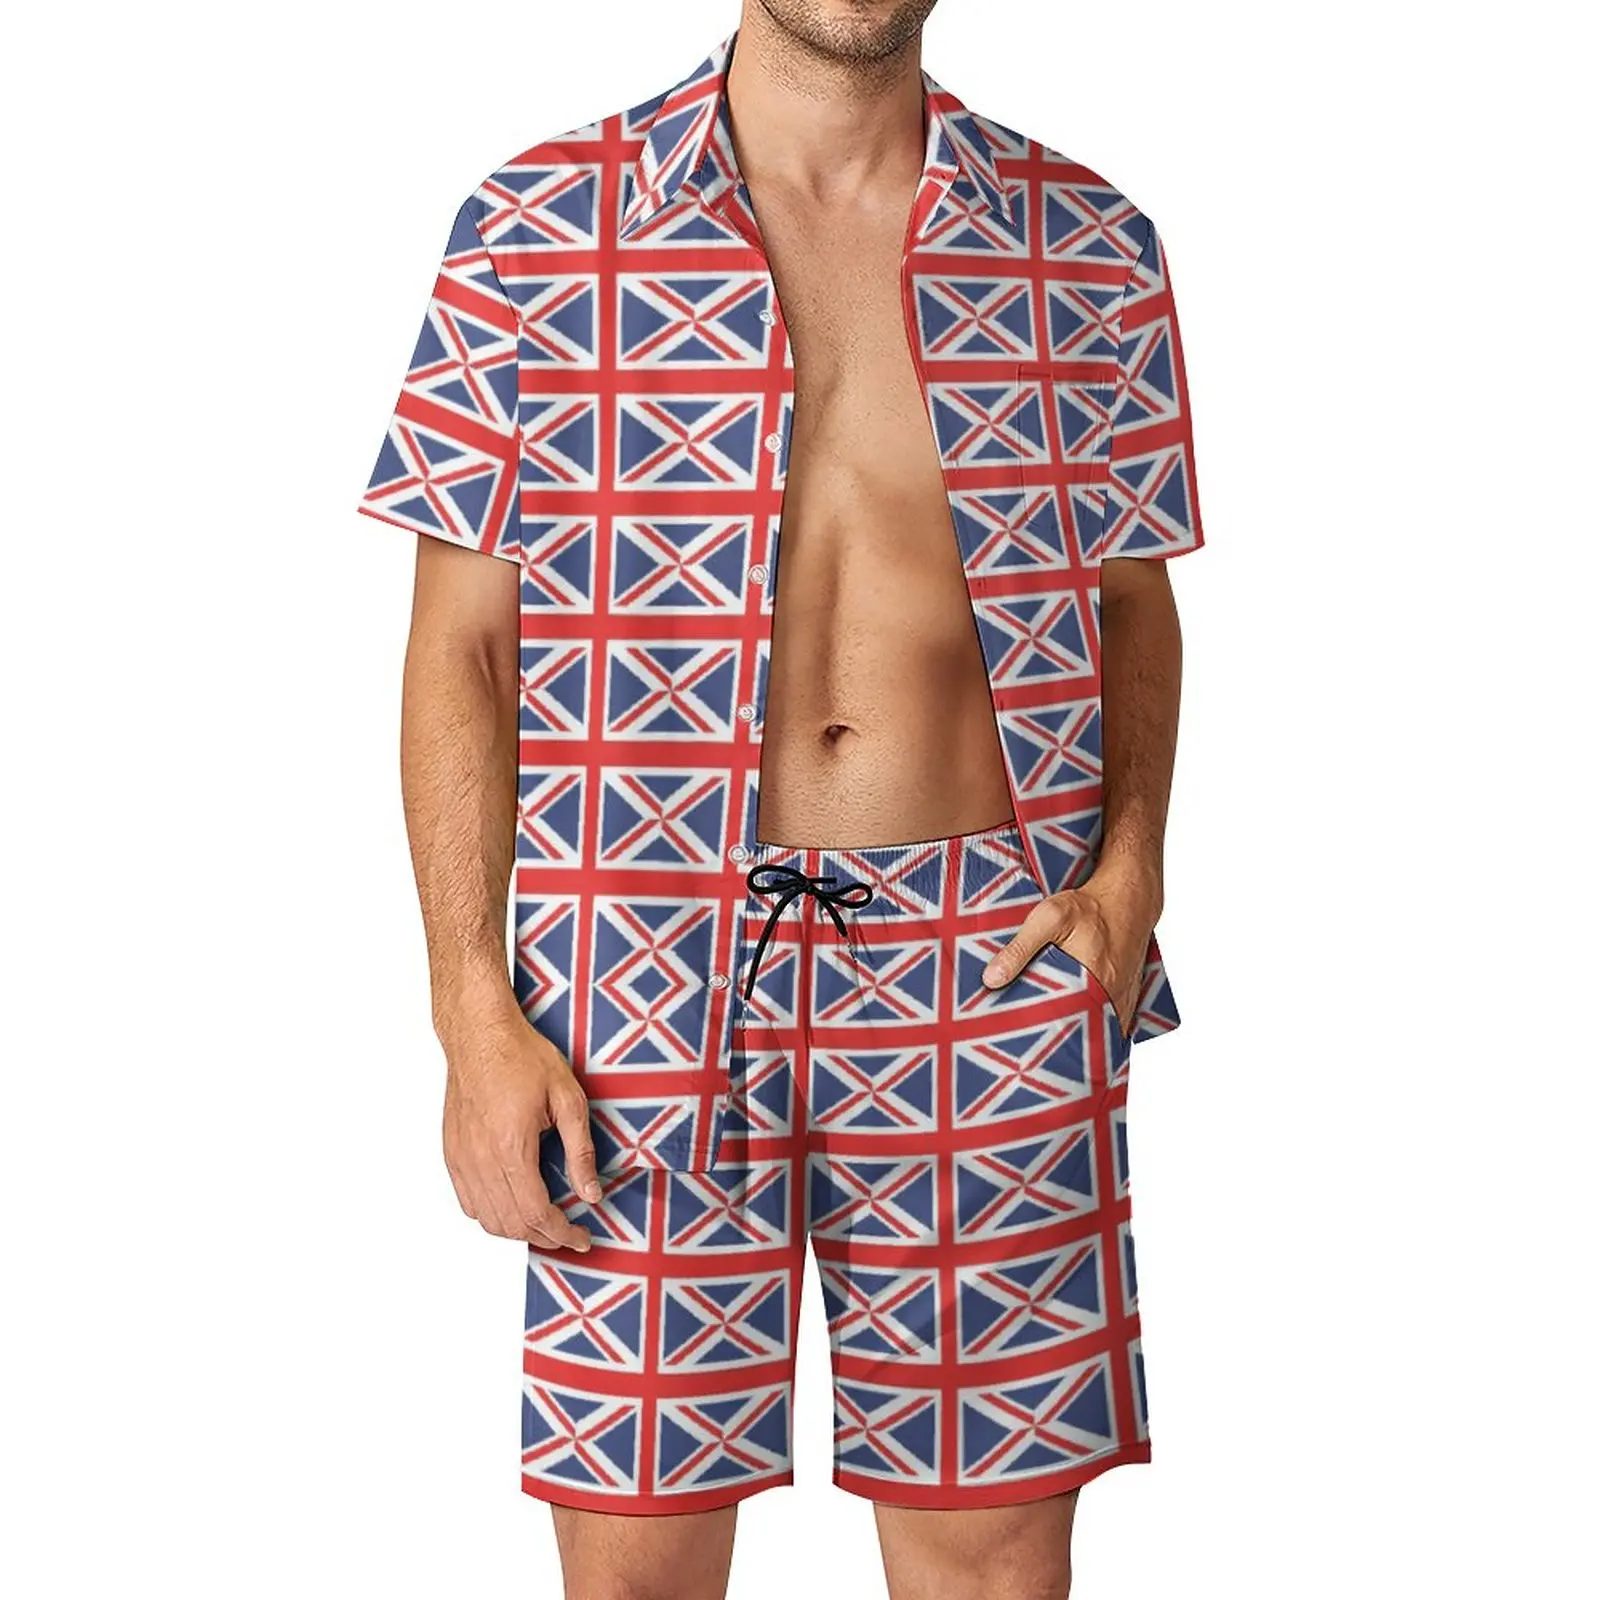 

Union Jack Flag of The United Kingdom. Tapestry Y Men's Beach Suit Unique 2 Pieces Coordinates top Quality Running USA Size